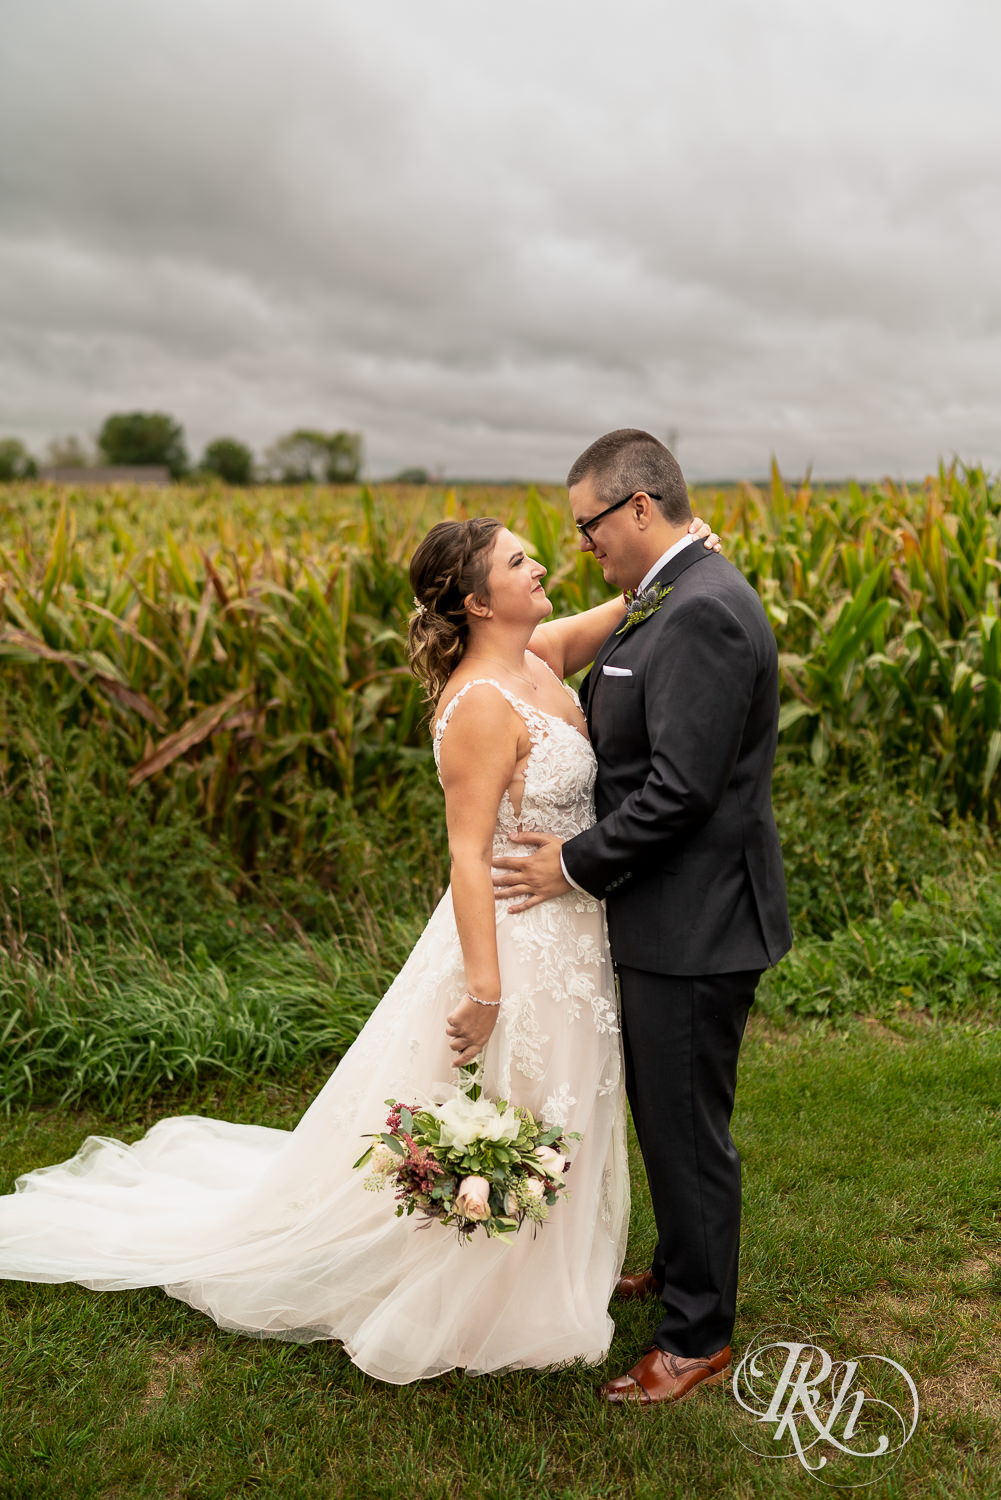 Bride and groom looking at each other in front of cornfield at Glenhaven Events in Farmington, Minnesota.